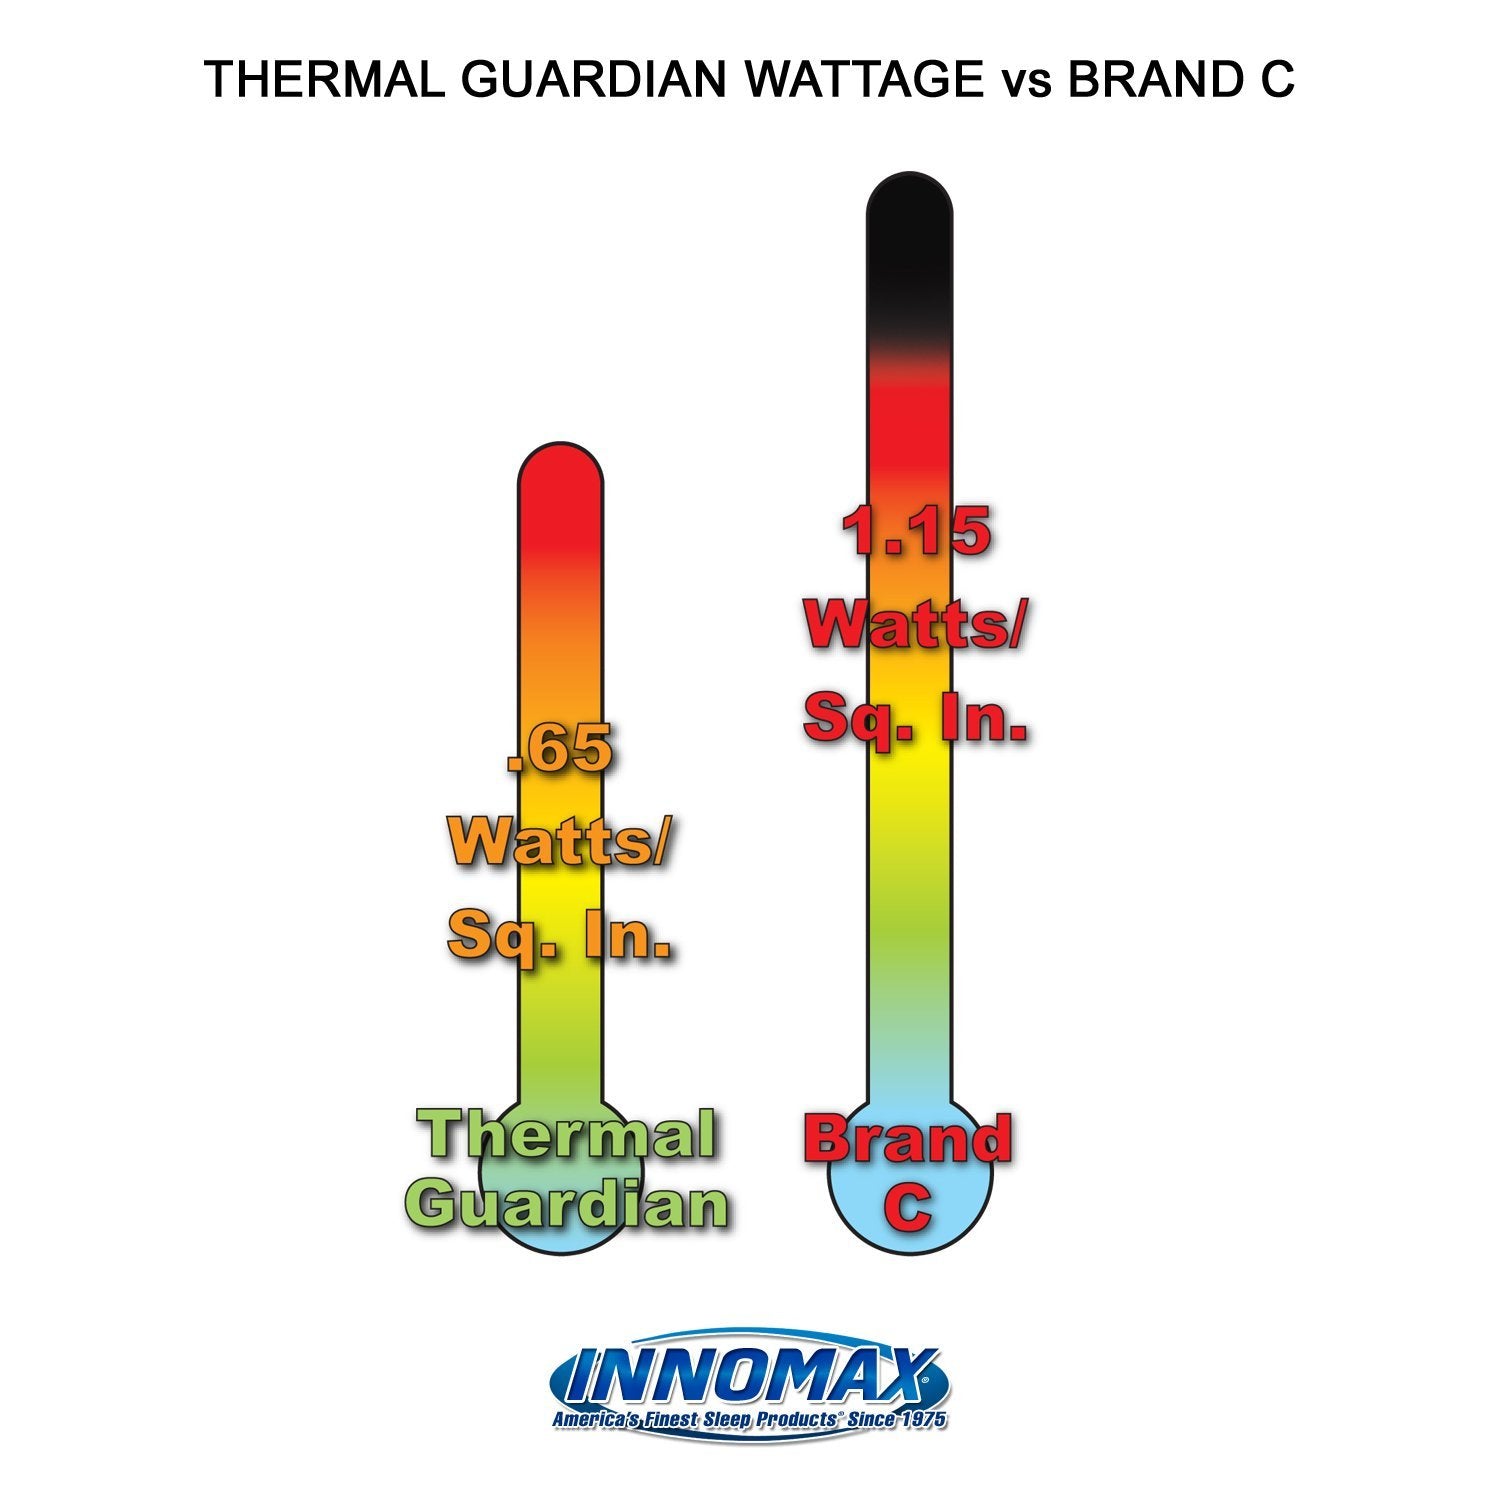 INNOMAX Thermal Guardian Touch Temp Solid State Hardside Waterbed Heater, Full Watt